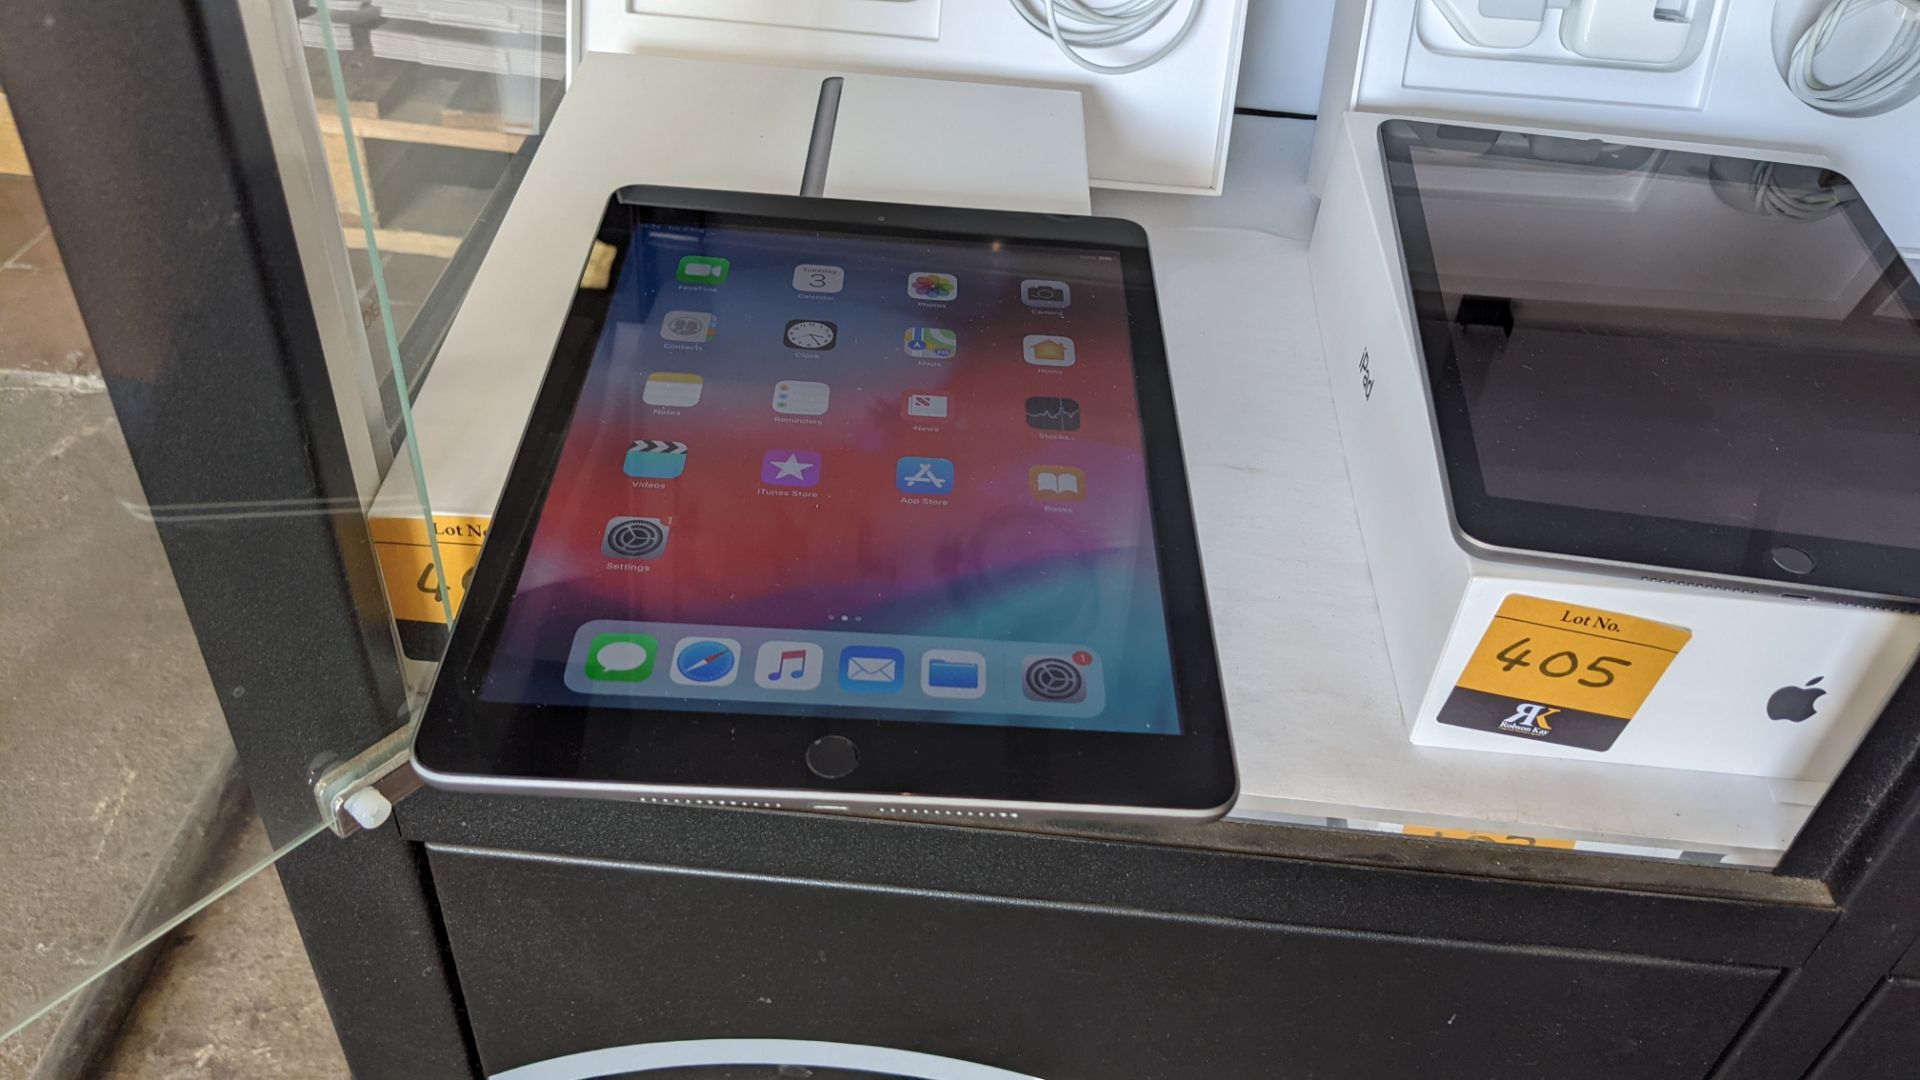 Apple iPad (space grey) 5th generation 32Gb Wi-Fi 9.7" Retina screen. Product code A1822. Apple A9 - Image 2 of 12